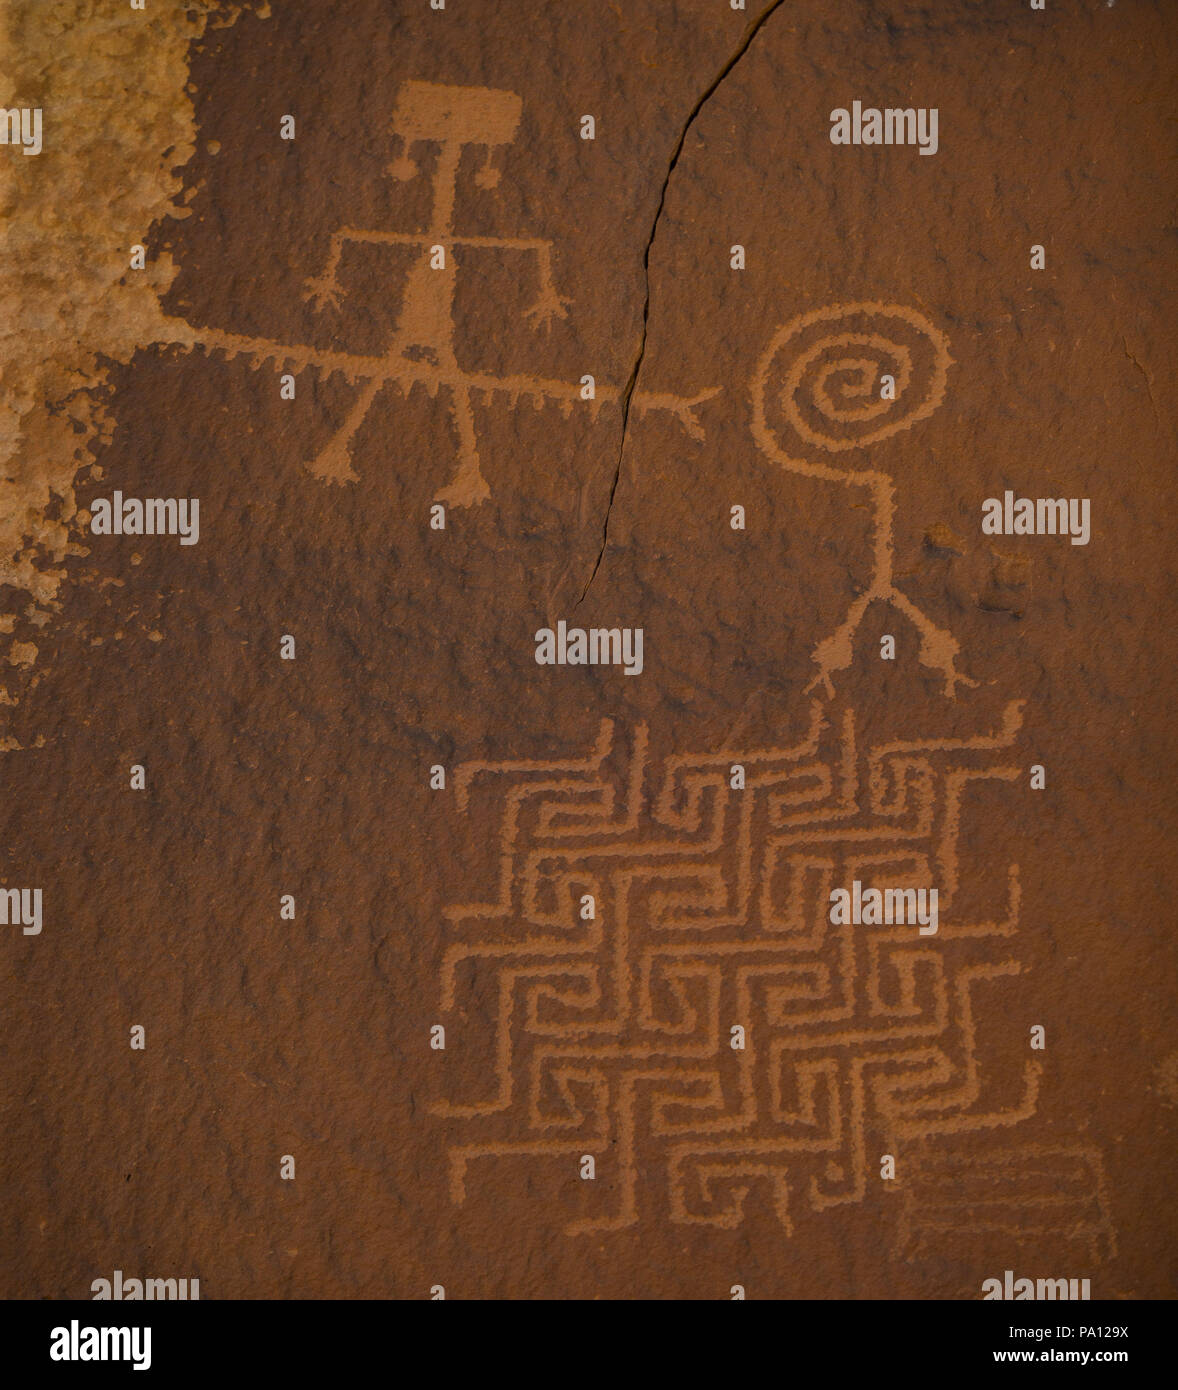 Utah, USA. 25th June, 2018. The Maze Rock Art Site features Archaic and Ancestral Puebloan petroglyphs depicting anthropomorphic, zoomorphic, and abstract designs in Vermillion Cliffs National Monument, Utah, on Monday, June 25, 2018. Credit: L.E. Baskow/ZUMA Wire/Alamy Live News Stock Photo